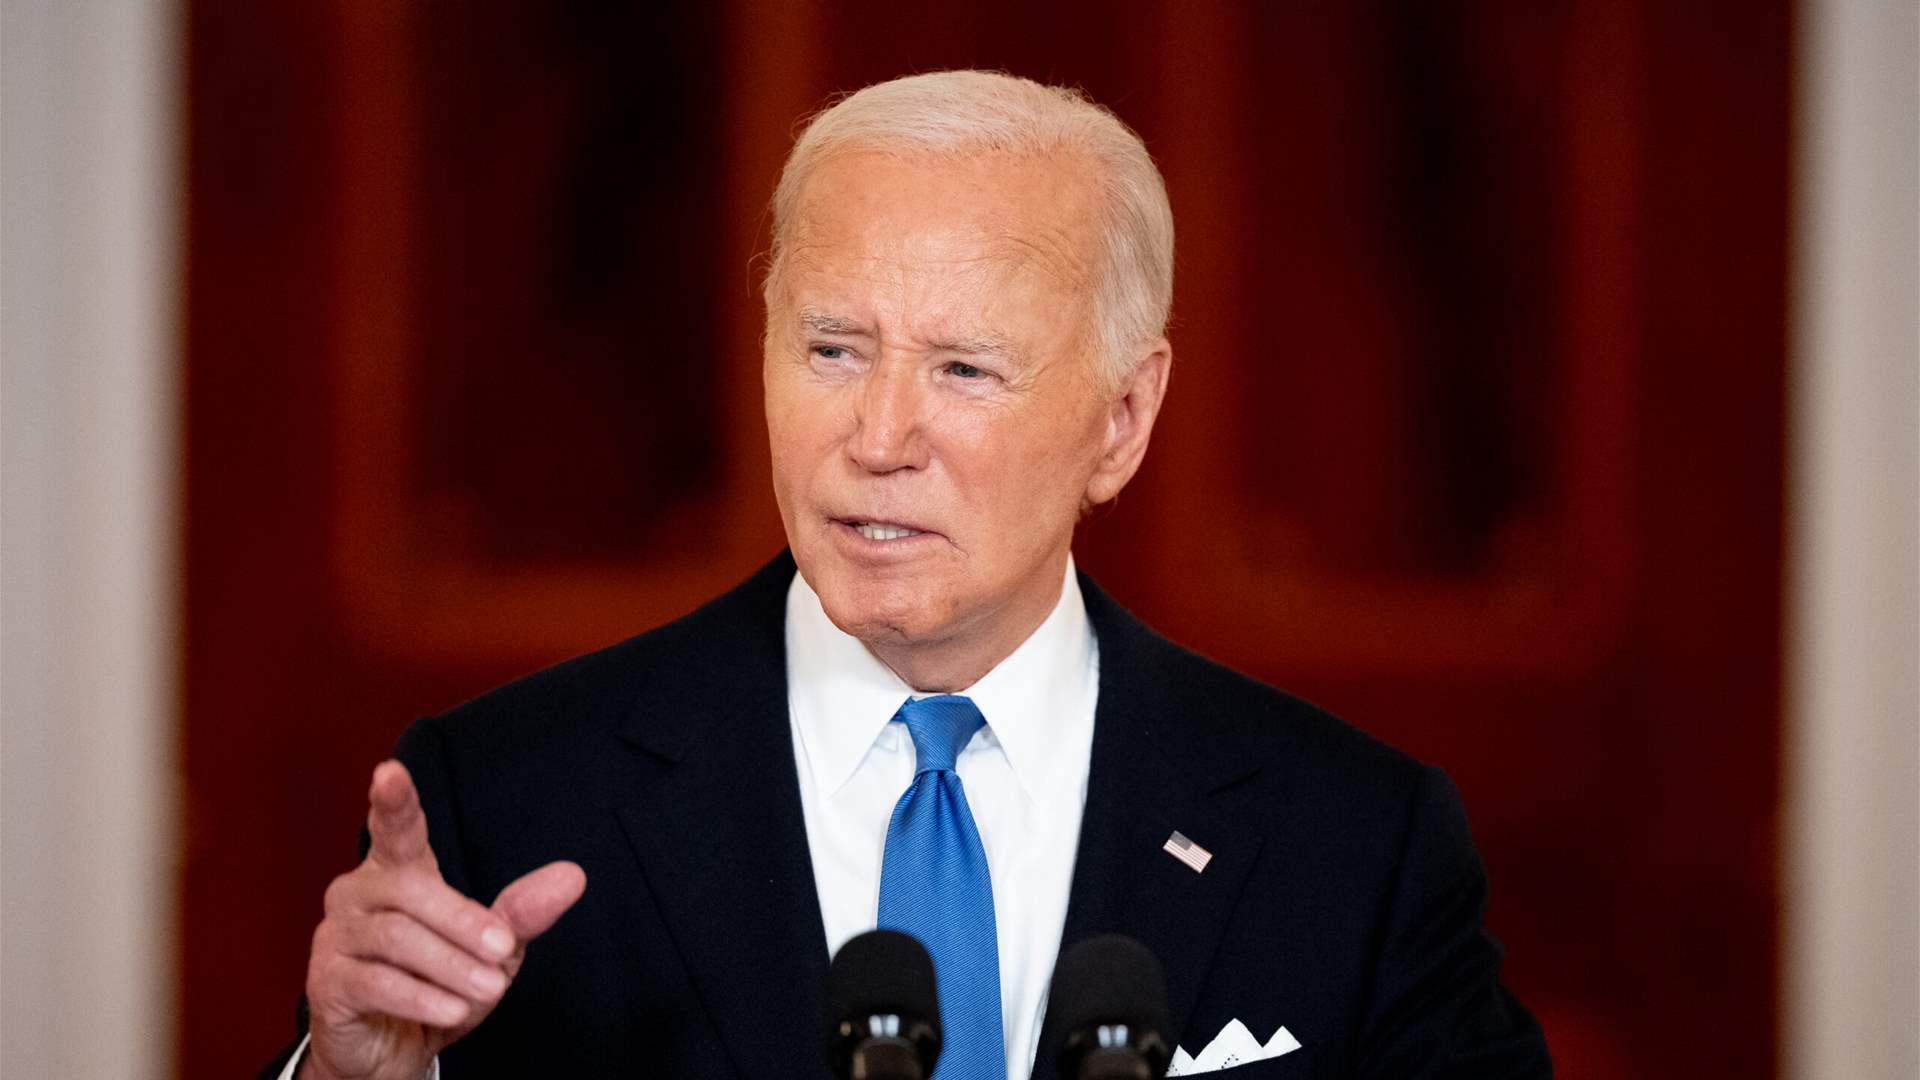 Biden &#39;absolutely not&#39; withdrawing from White House race